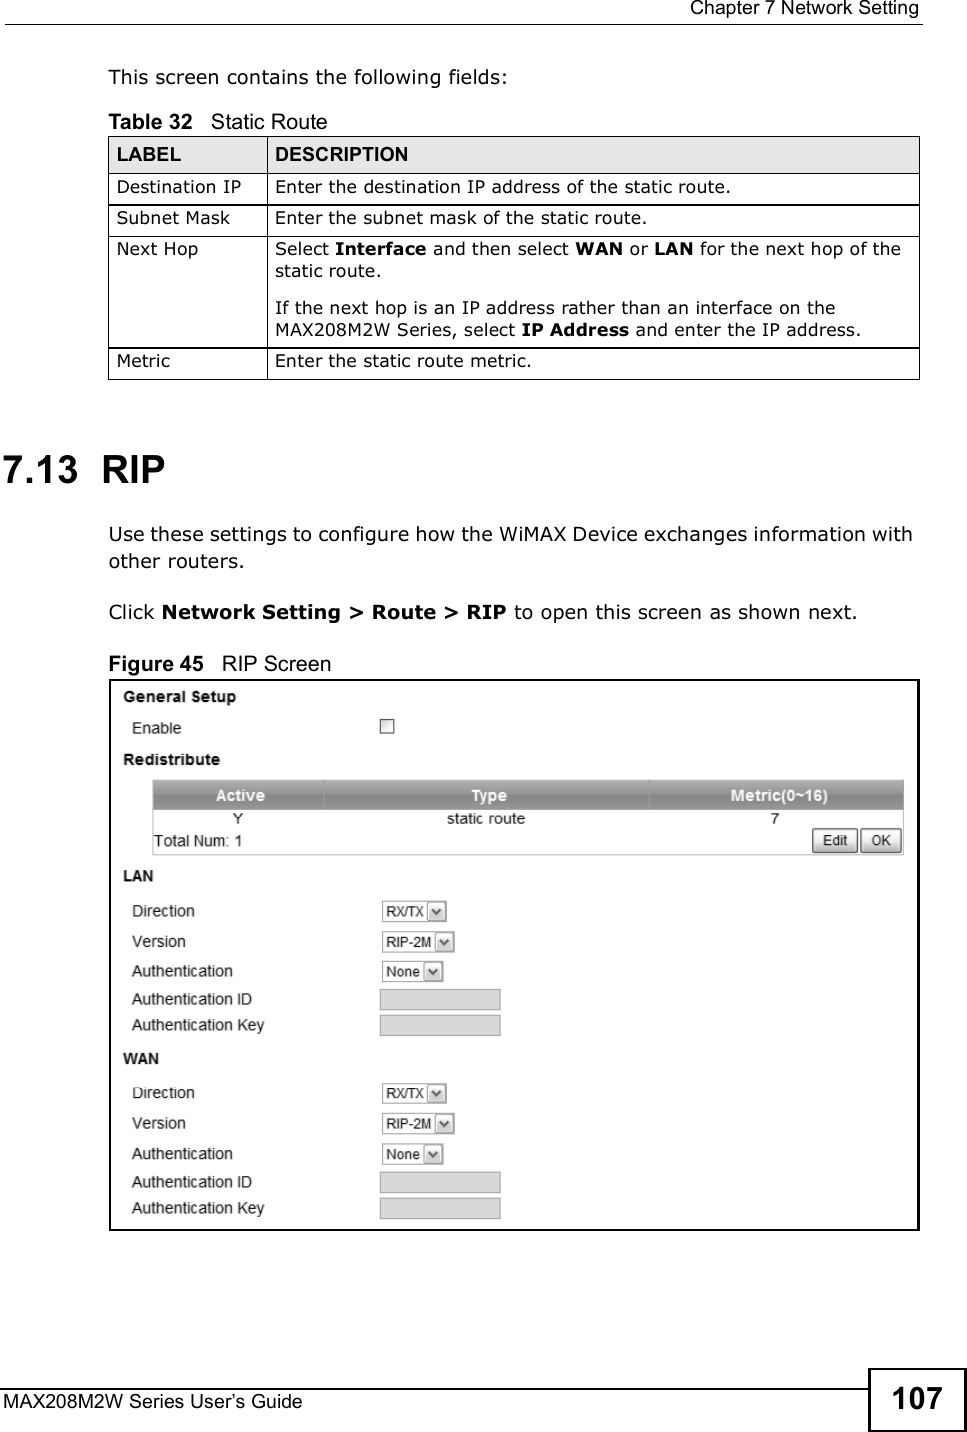  Chapter 7Network SettingMAX208M2W Series User s Guide 107This screen contains the following fields:7.13  RIPUse these settings to configure how the WiMAX Device exchanges information with other routers.Click Network Setting &gt; Route &gt; RIP to open this screen as shown next.Figure 45   RIP ScreenTable 32   Static RouteLABEL DESCRIPTIONDestination IPEnter the destination IP address of the static route.Subnet MaskEnter the subnet mask of the static route.Next HopSelect Interface and then select WAN or LAN for the next hop of the static route.If the next hop is an IP address rather than an interface on the MAX208M2W Series, select IP Address and enter the IP address.MetricEnter the static route metric.